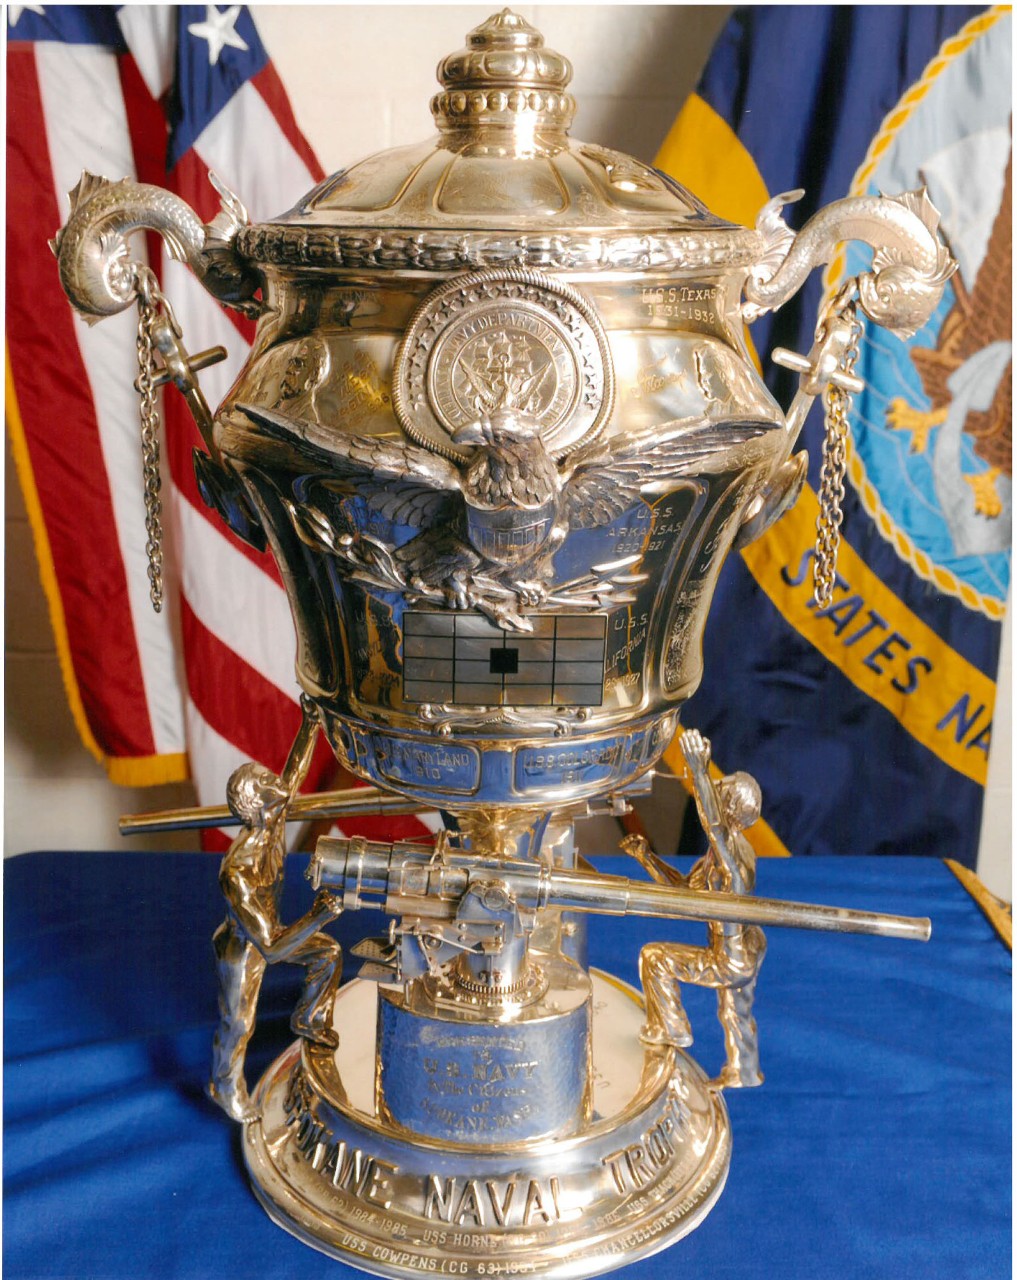 Silver urn style trophy with navy guns and men holding it a target and handles with a lid to cover the cup